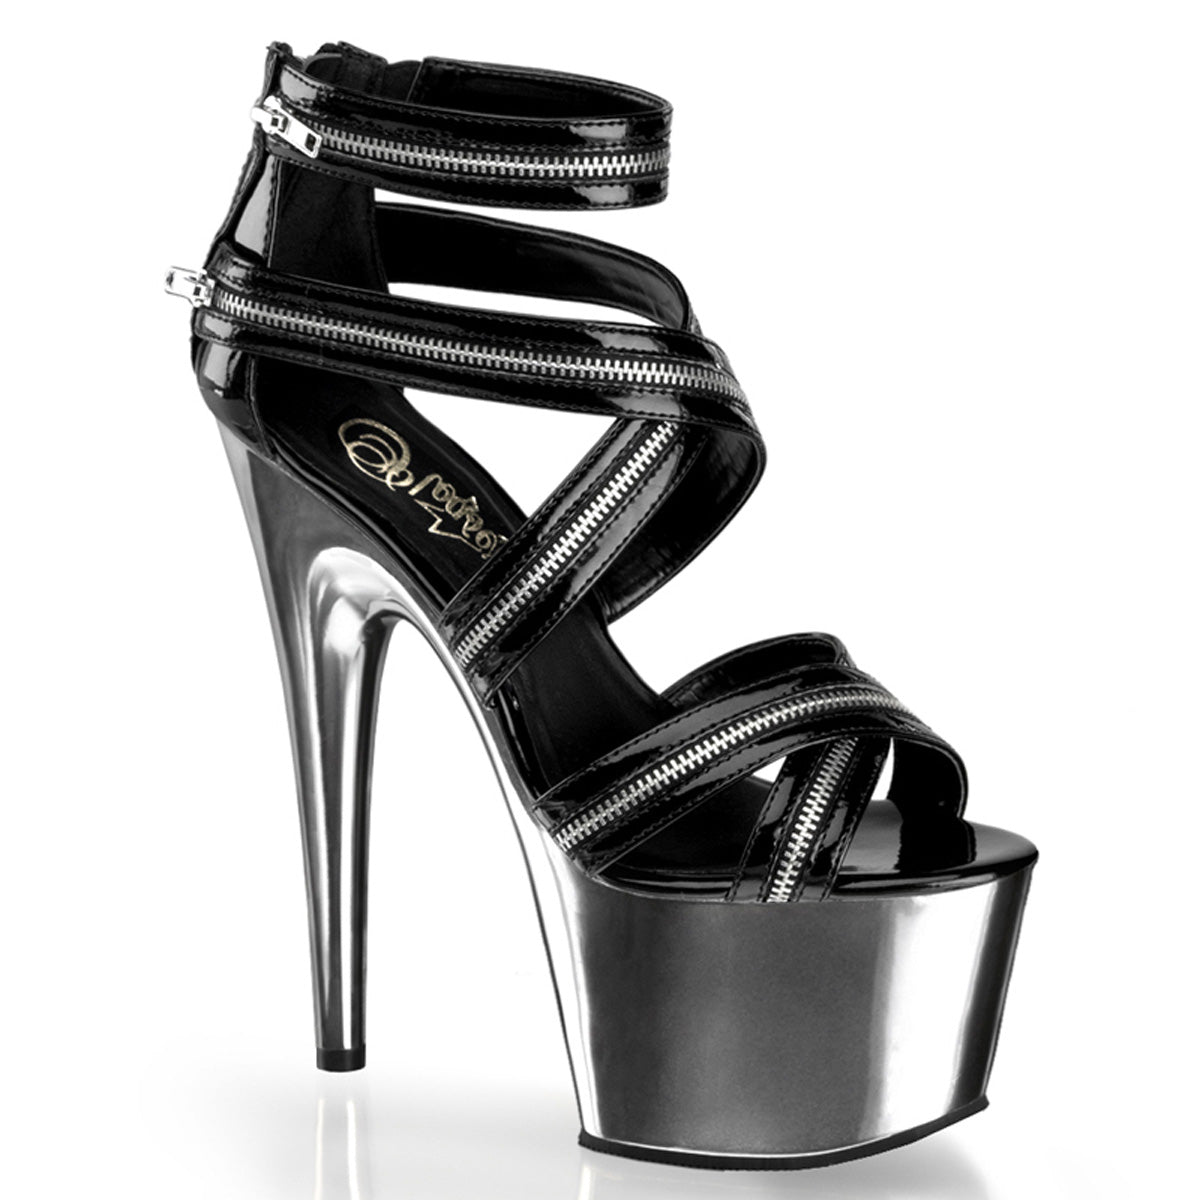 ADORE-767 7" Heel Black and Pewter Chrome Strippers Sandals-Pleaser- Sexy Shoes